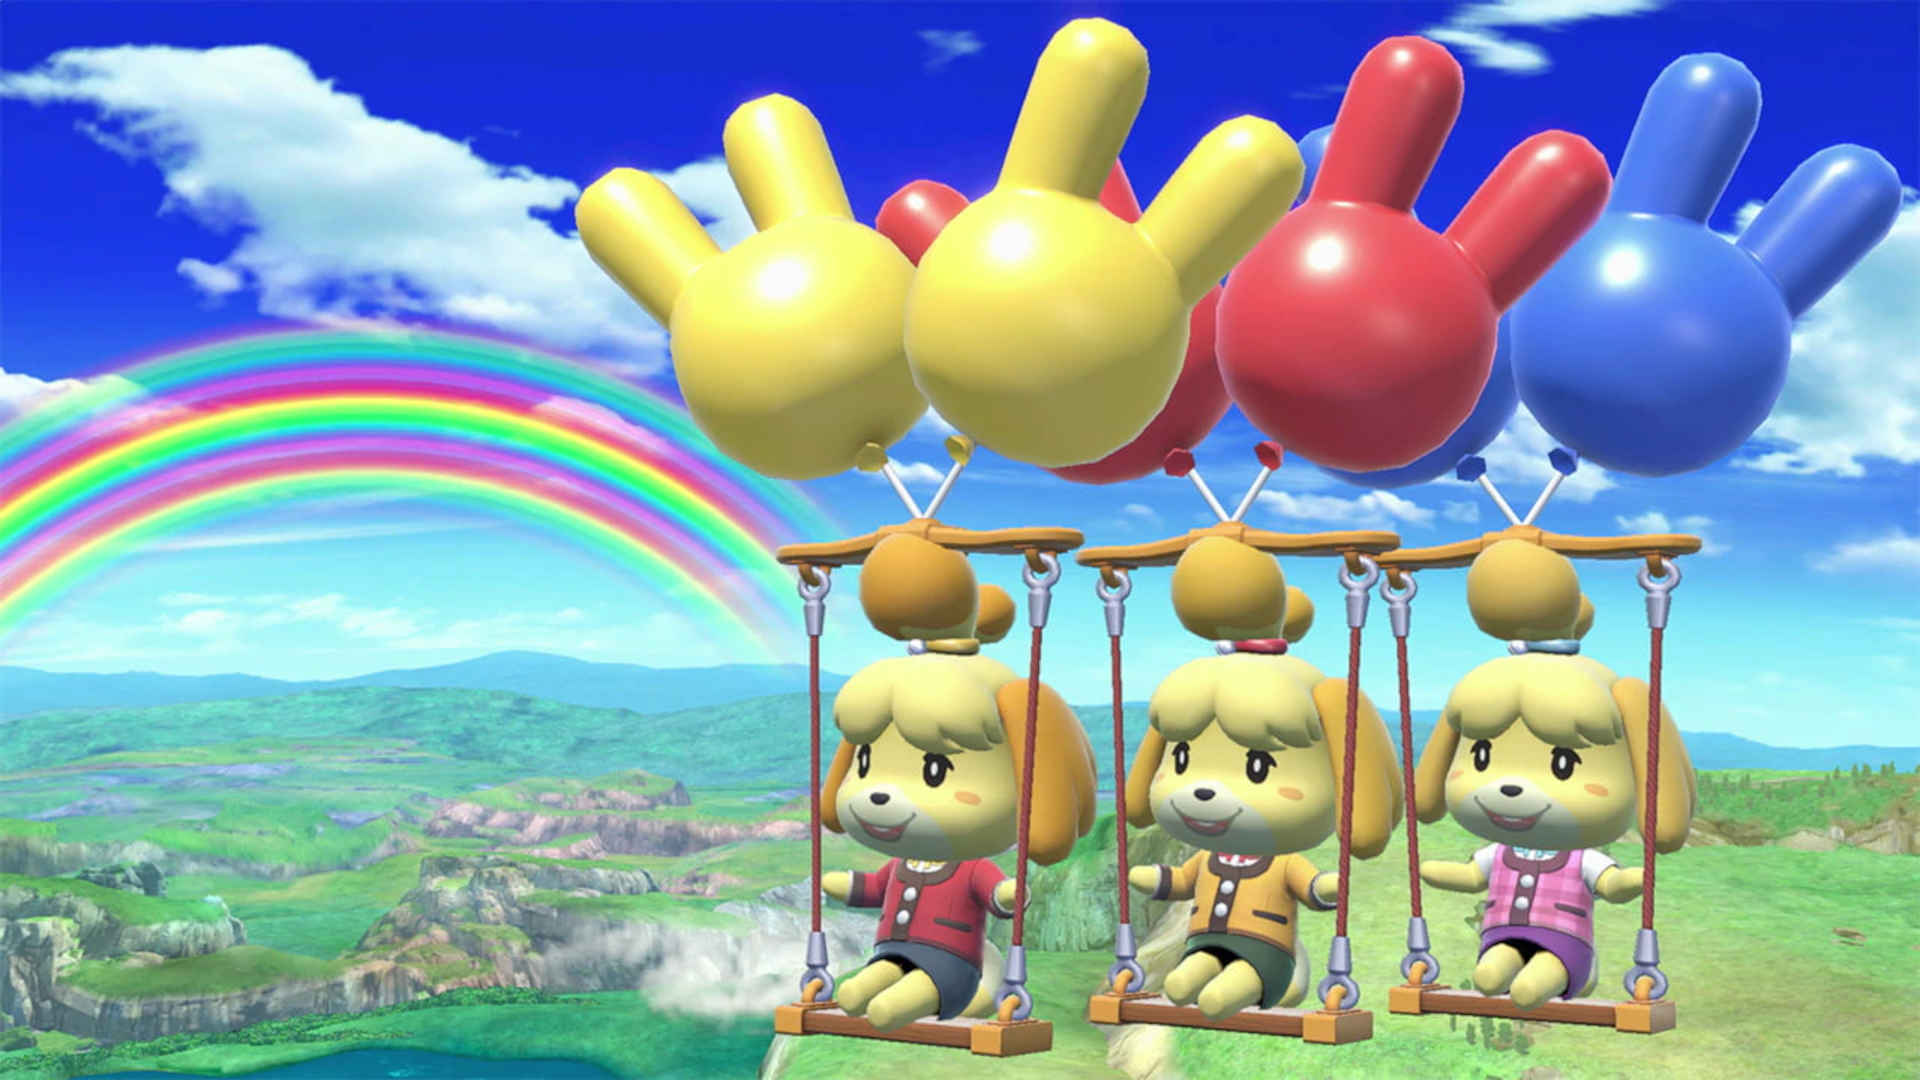 Smash Bros tier list - Three different Isabelle flying by on a swing held by balloons